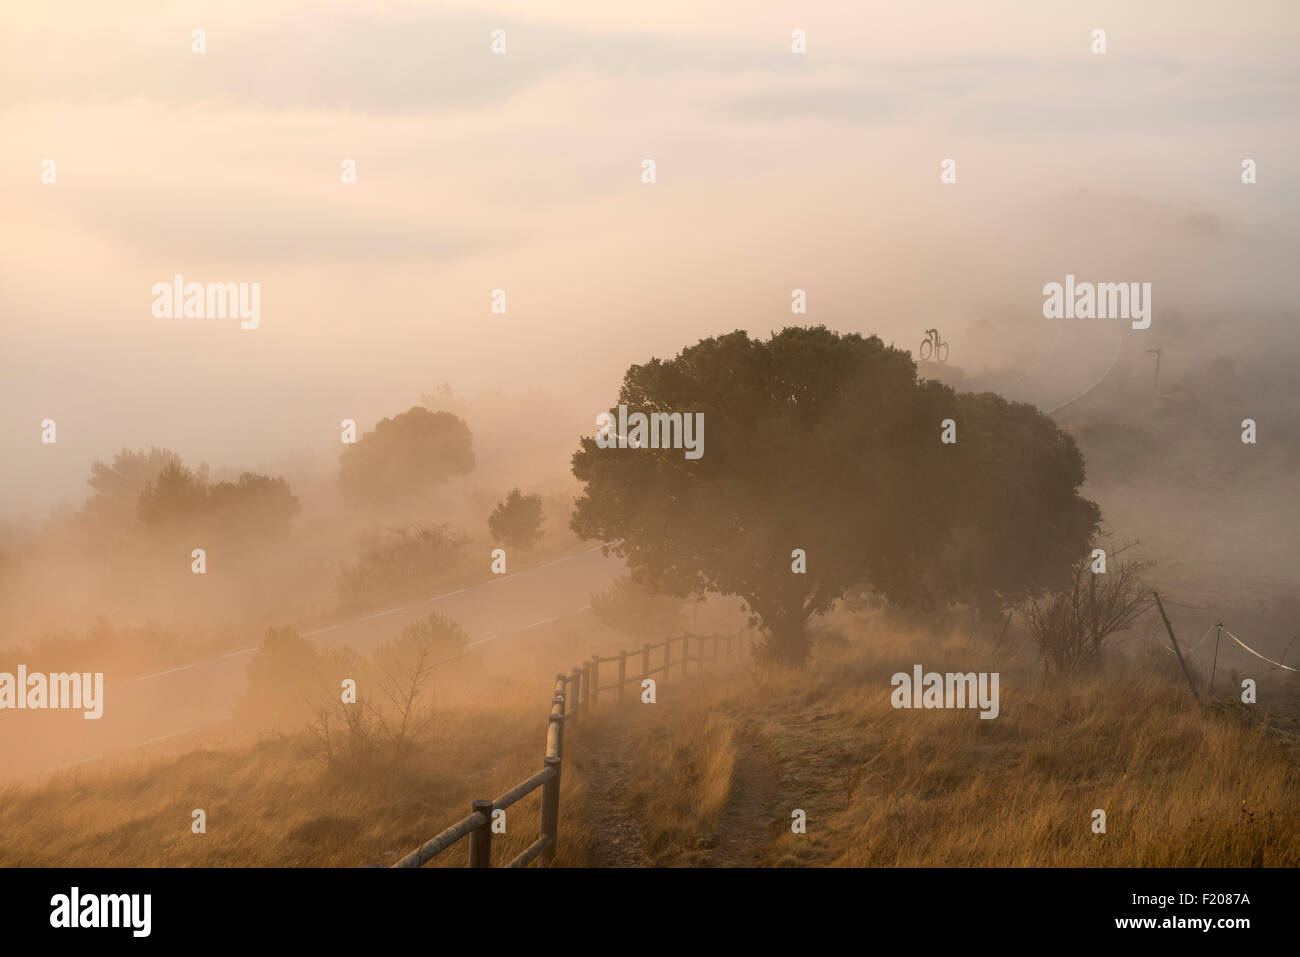 Sunrise landscape at Coll de Serra Seca in the Catalan Pré-Pyrenees with a yellow glow in the mist. Stock Photo